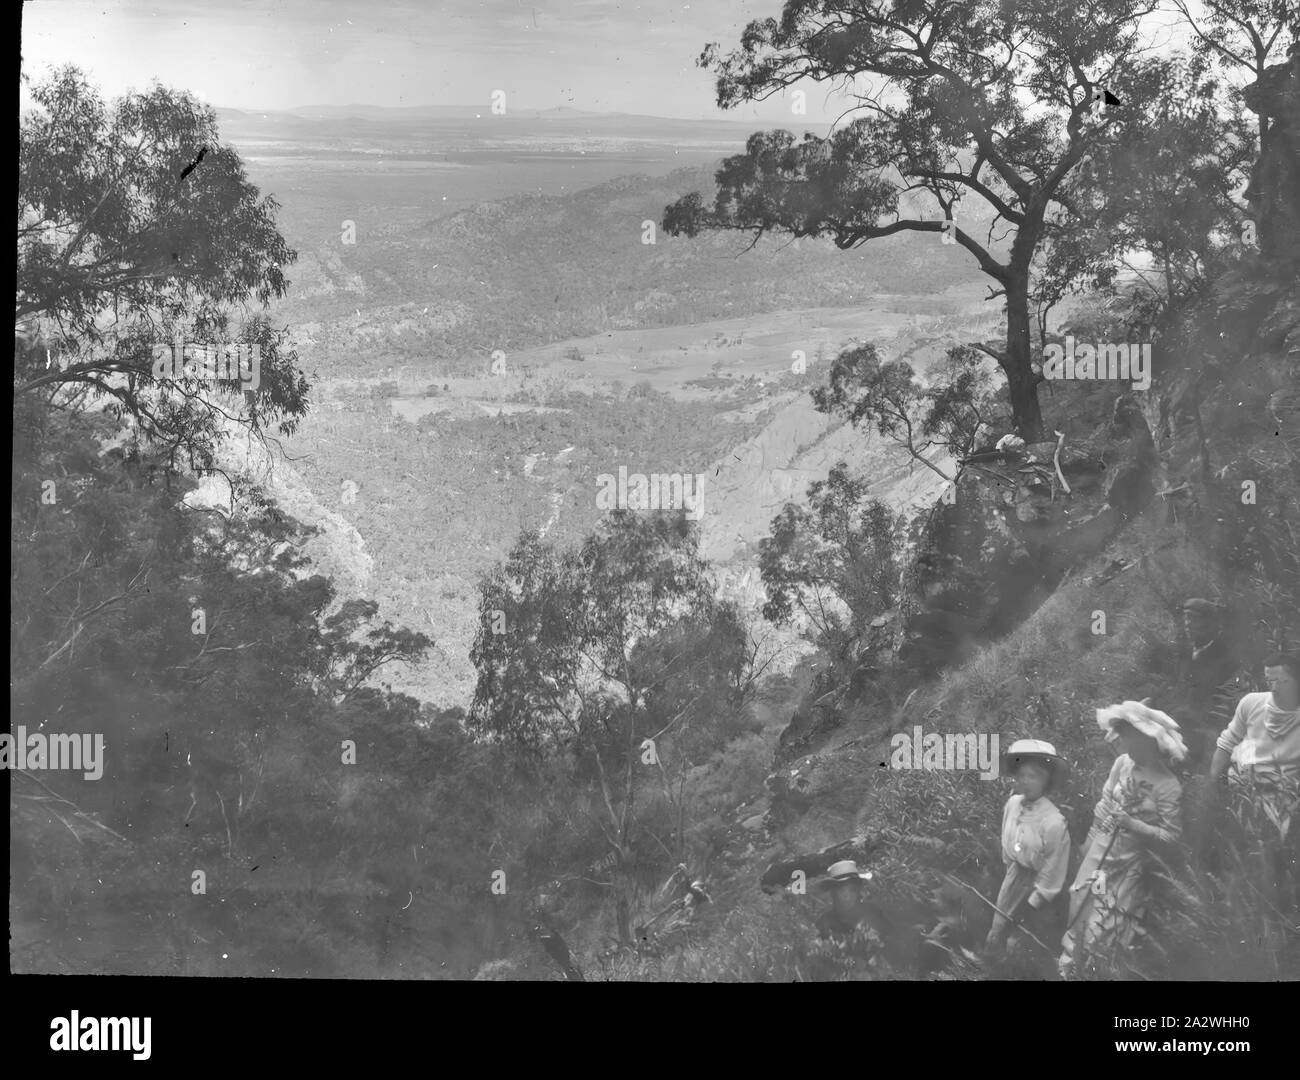 Lantern Slide - Dandenongs, Victoria, Date Unknown, Black and white image of people exploring the western face of the Dandenongs around the Kilsyth/Montrose area, overlooking Mt Disappointment in the distance, photographed by A.J. Campbell Stock Photo